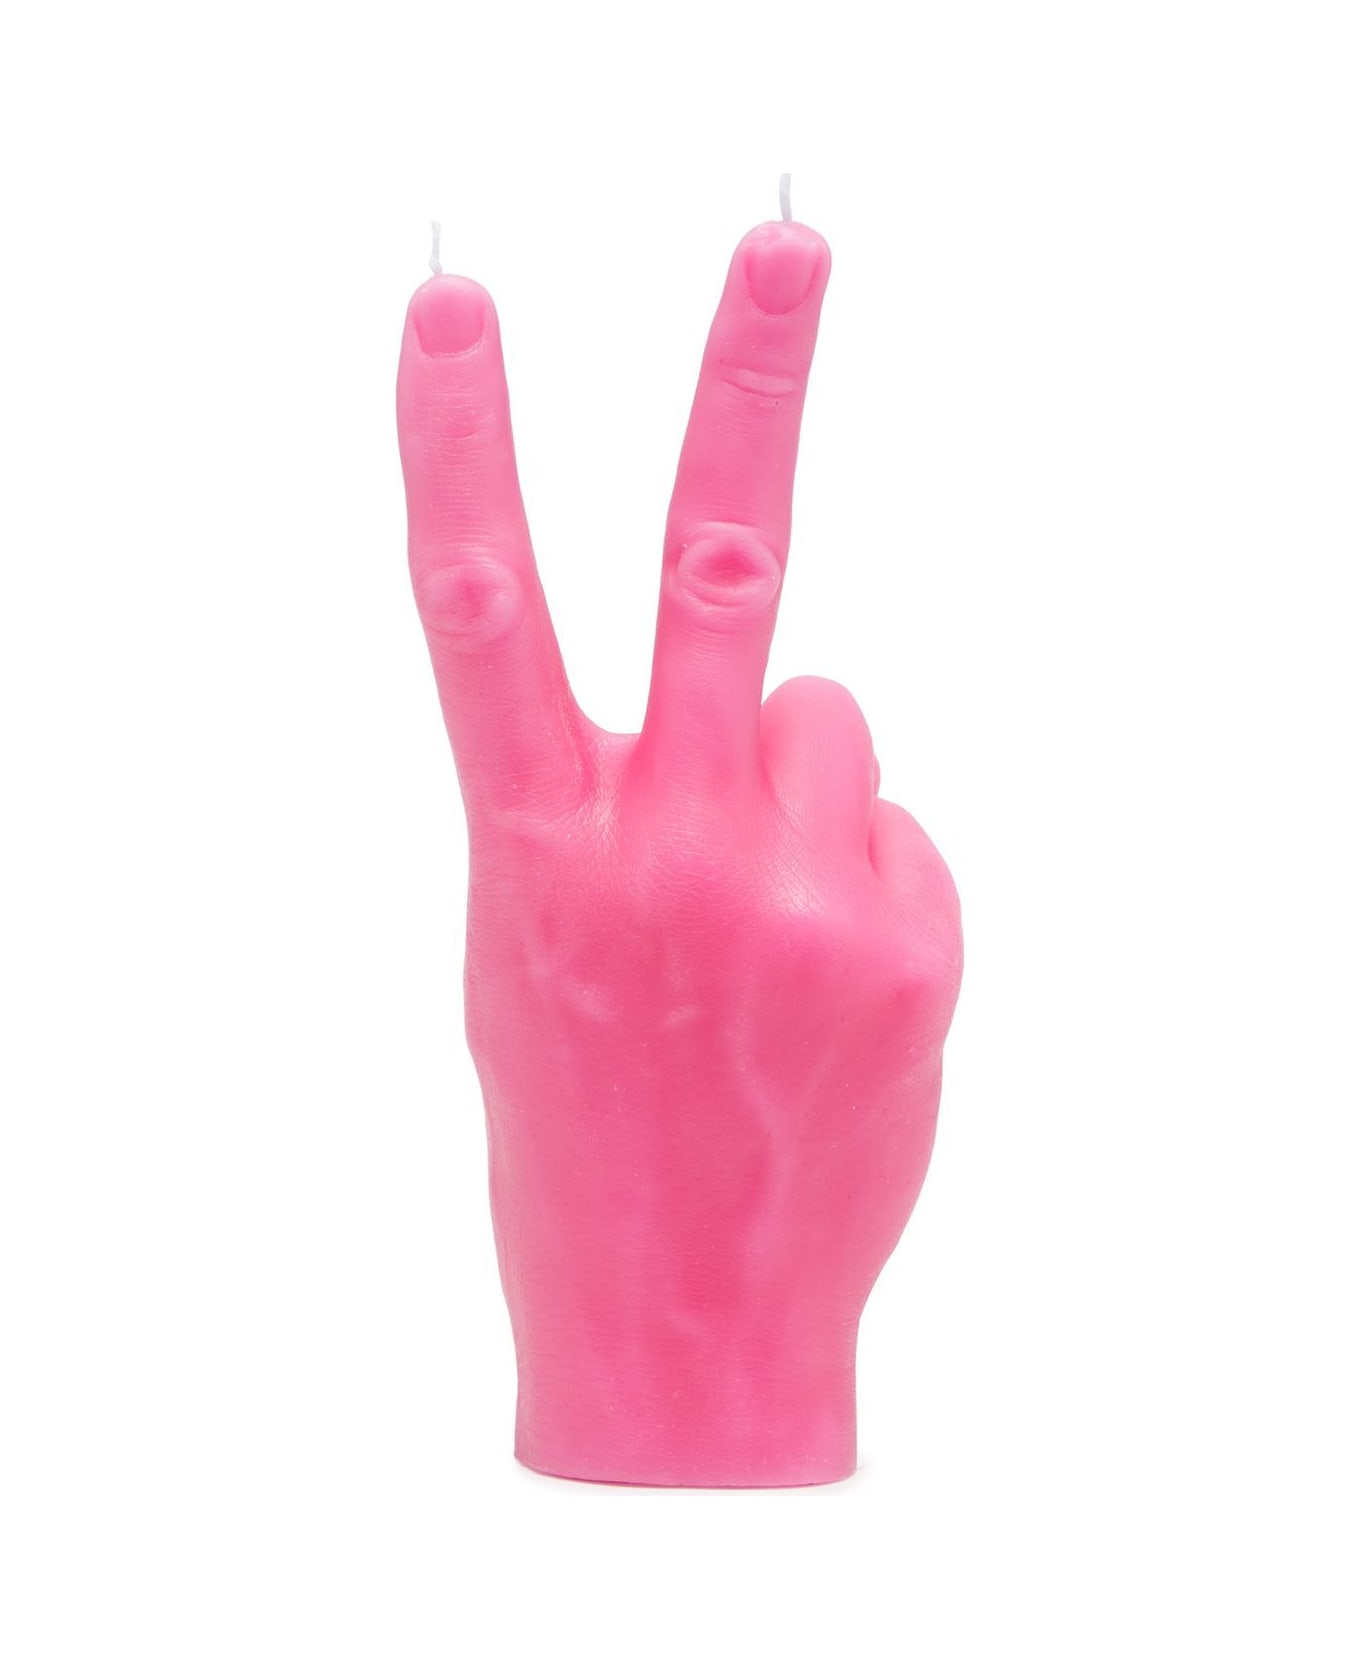 Candlehand Peace Candle - Pink